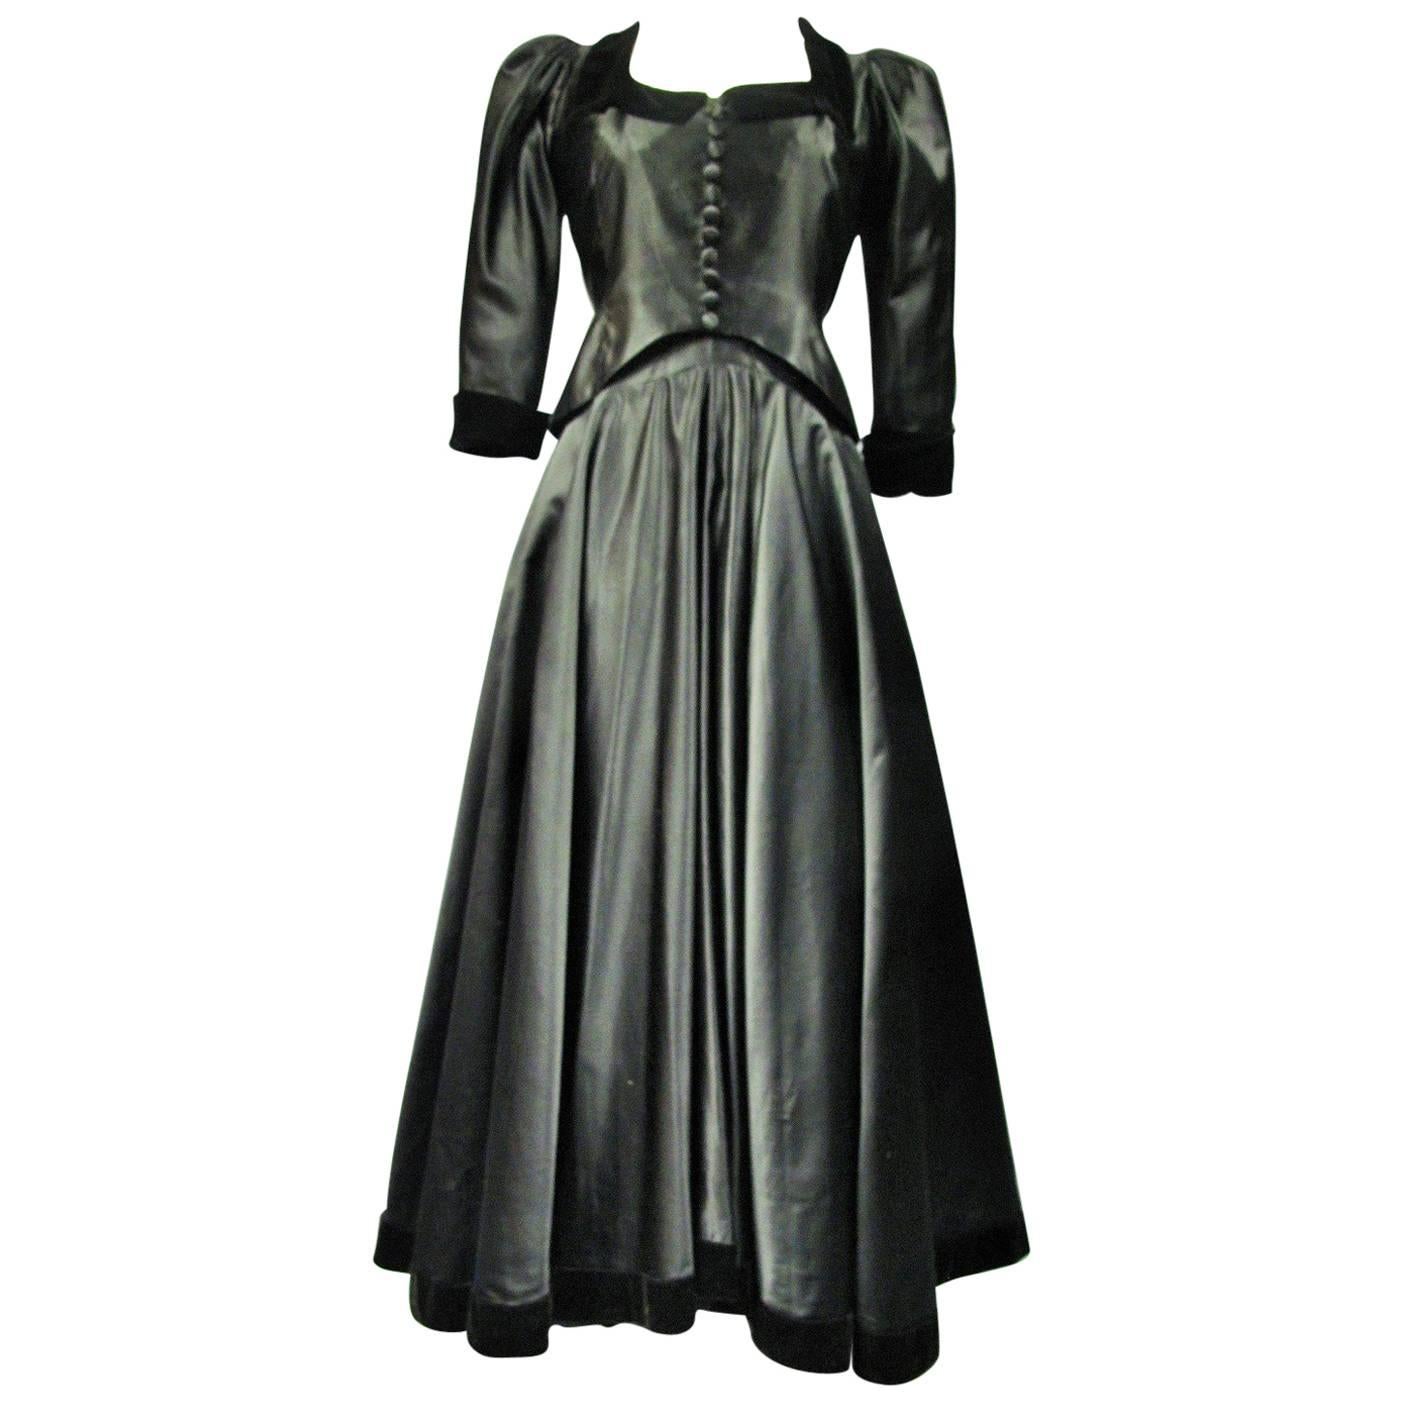 A Maggy Rouff Haute Couture black satin and velvet Evening Dress, Circa 1935 For Sale